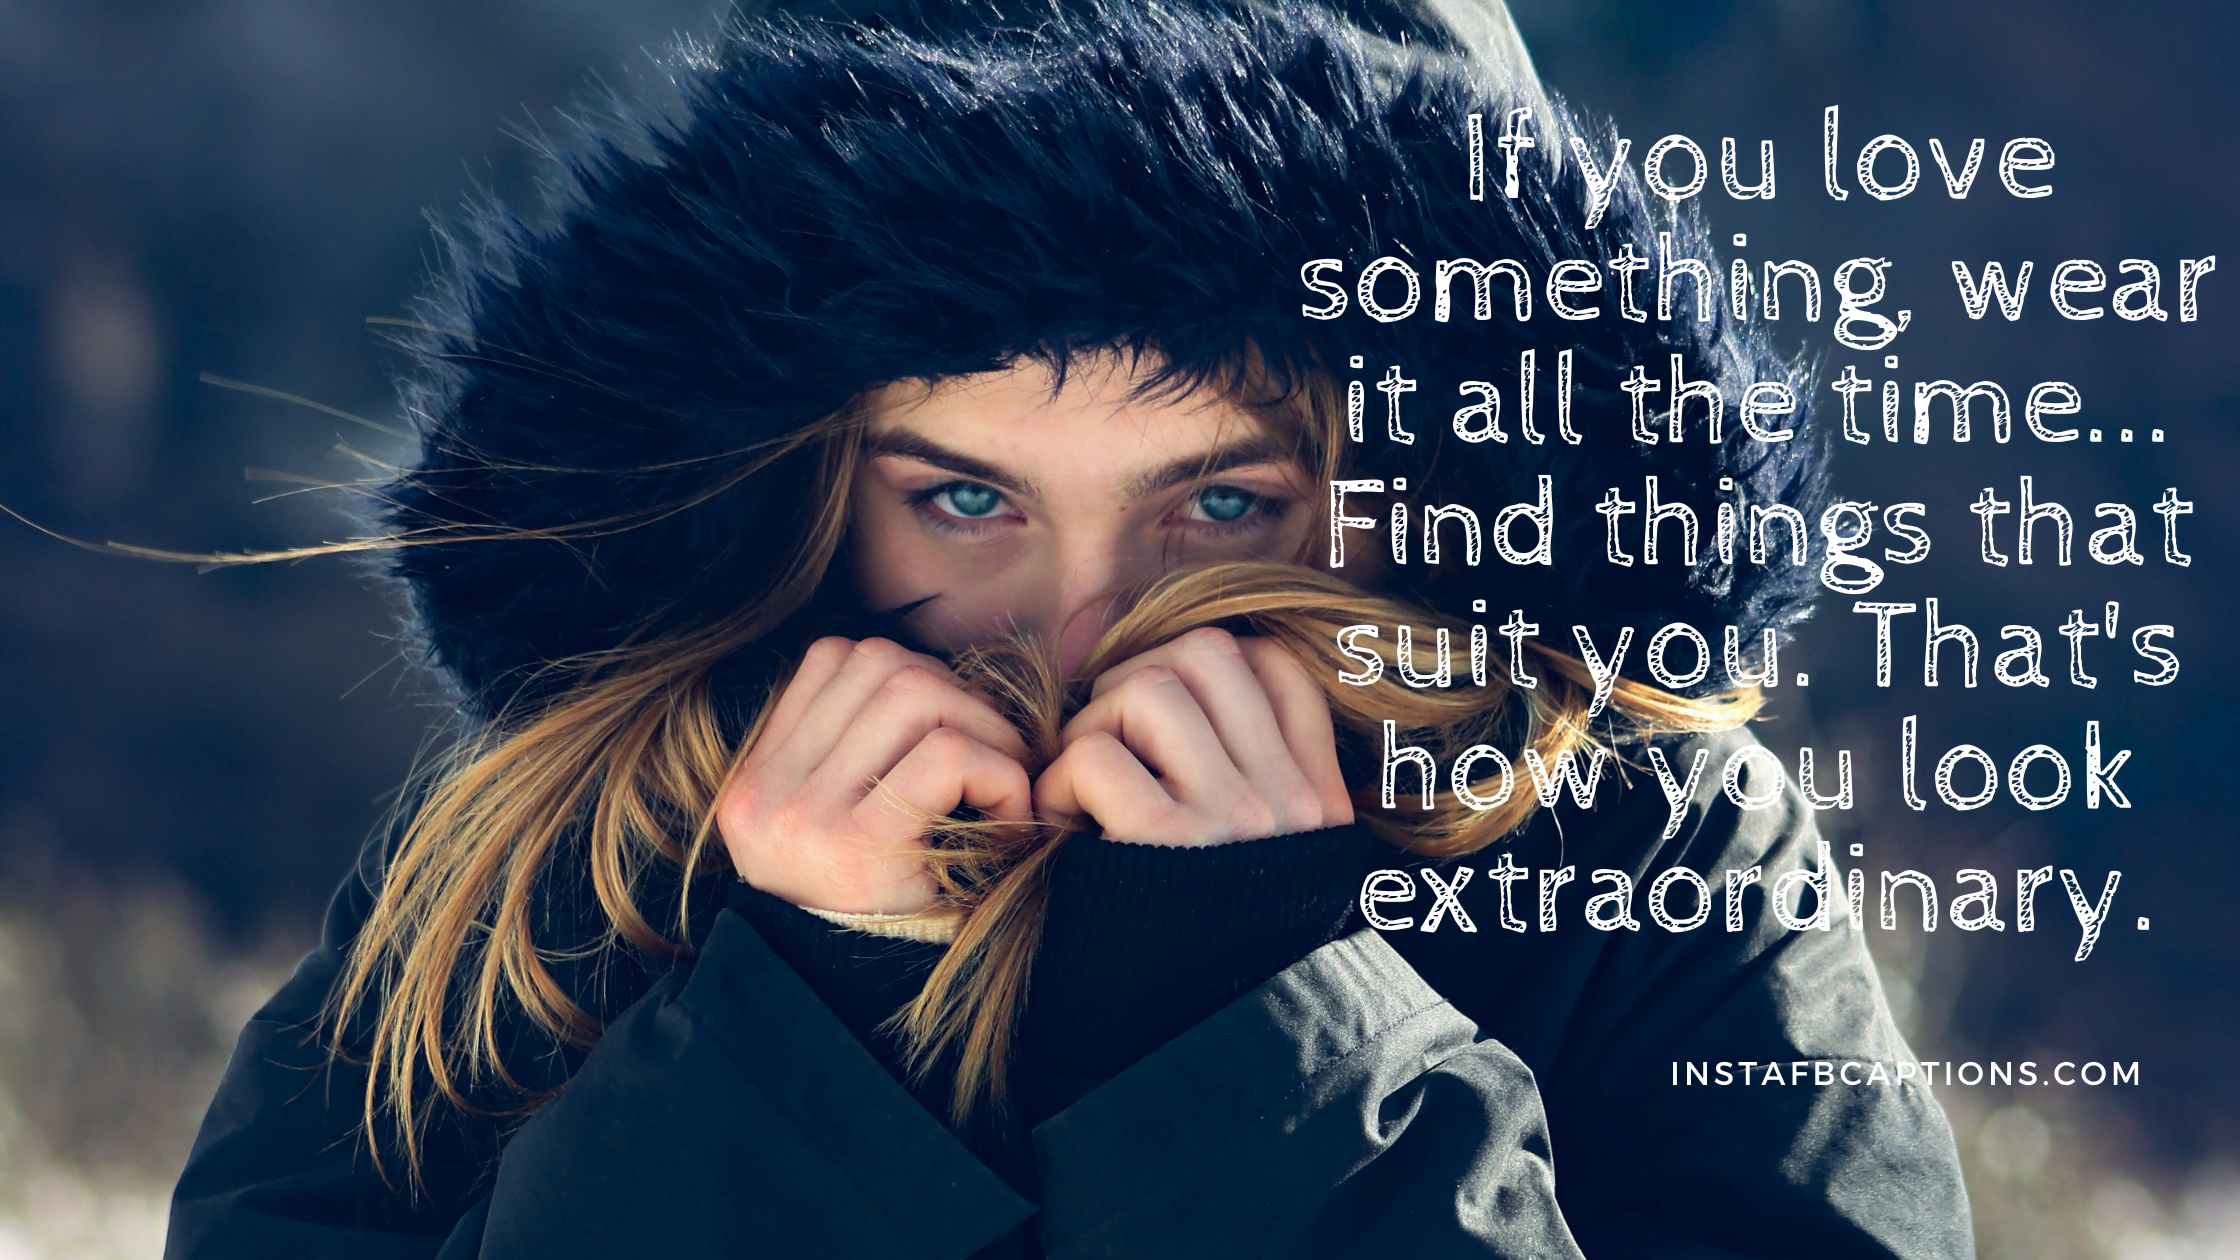 Top Quotes On Winter Fashio  - Top Quotes On winter Fashion - 84 Glacier Instagram Captions Quotes in 2022